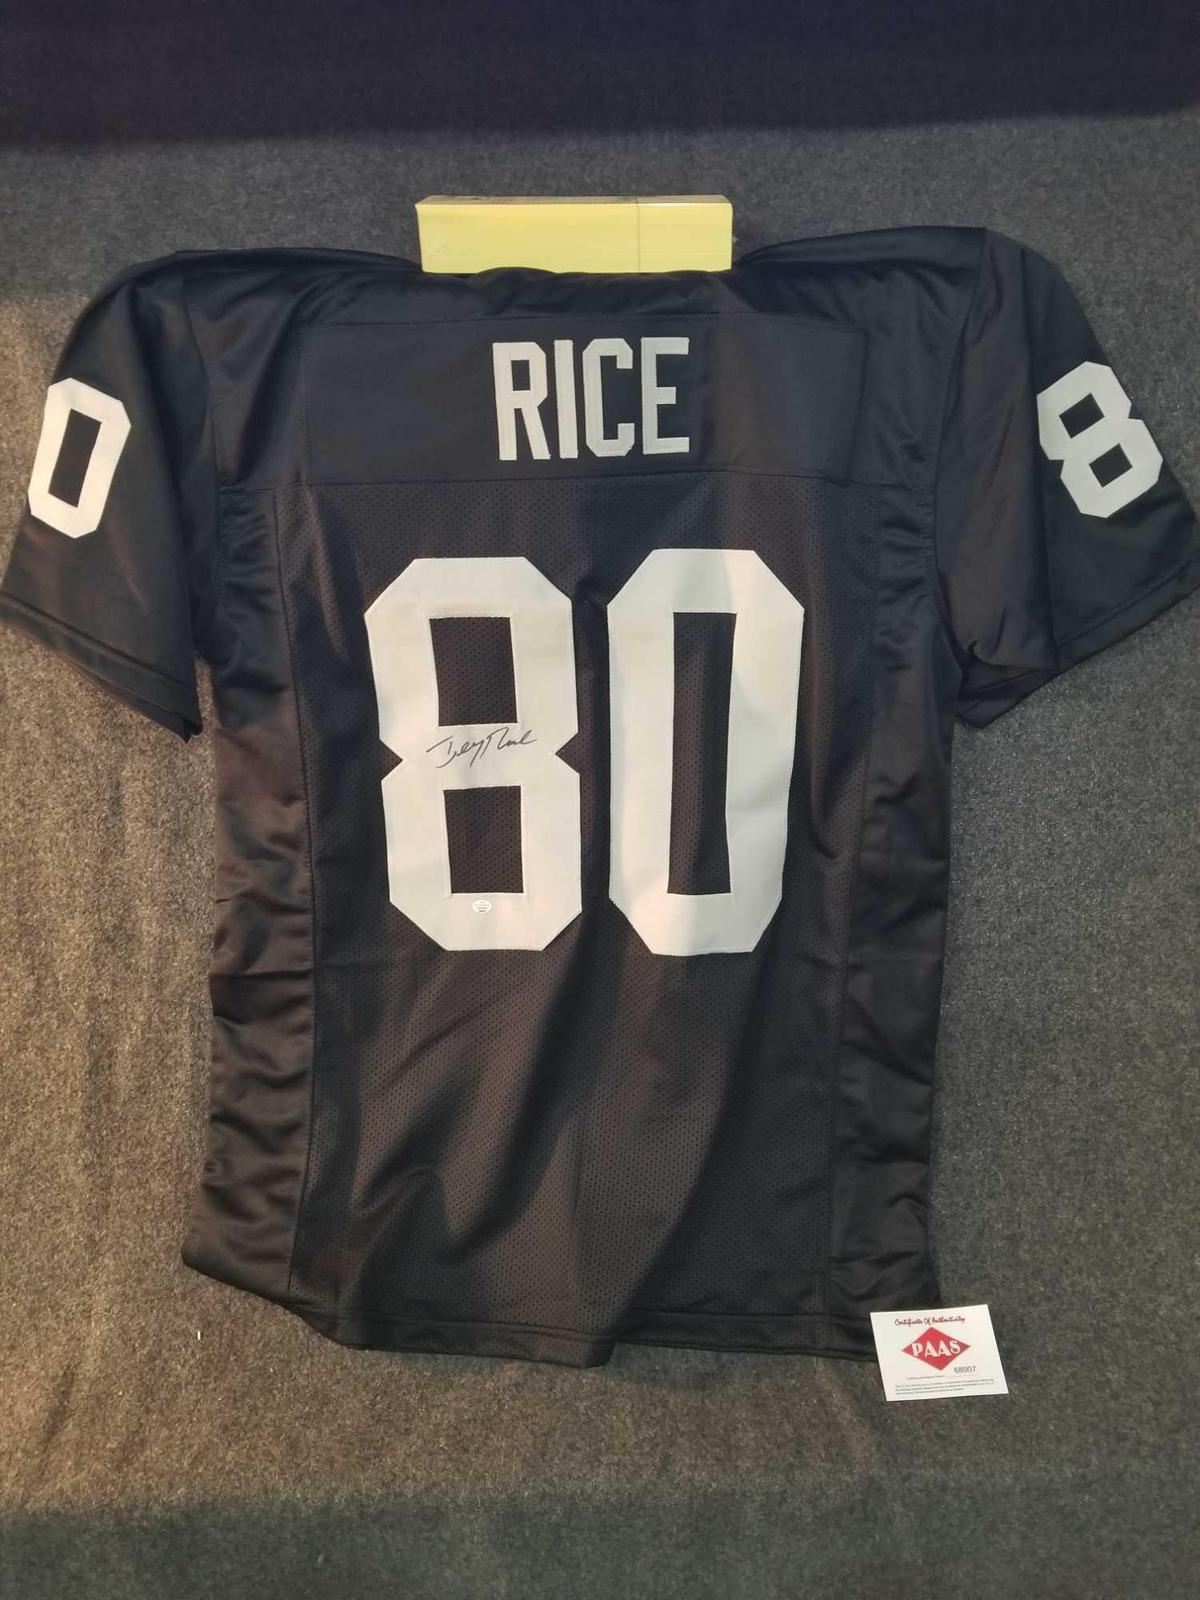 Jerry Rice signed jersey, Raiders, with cert